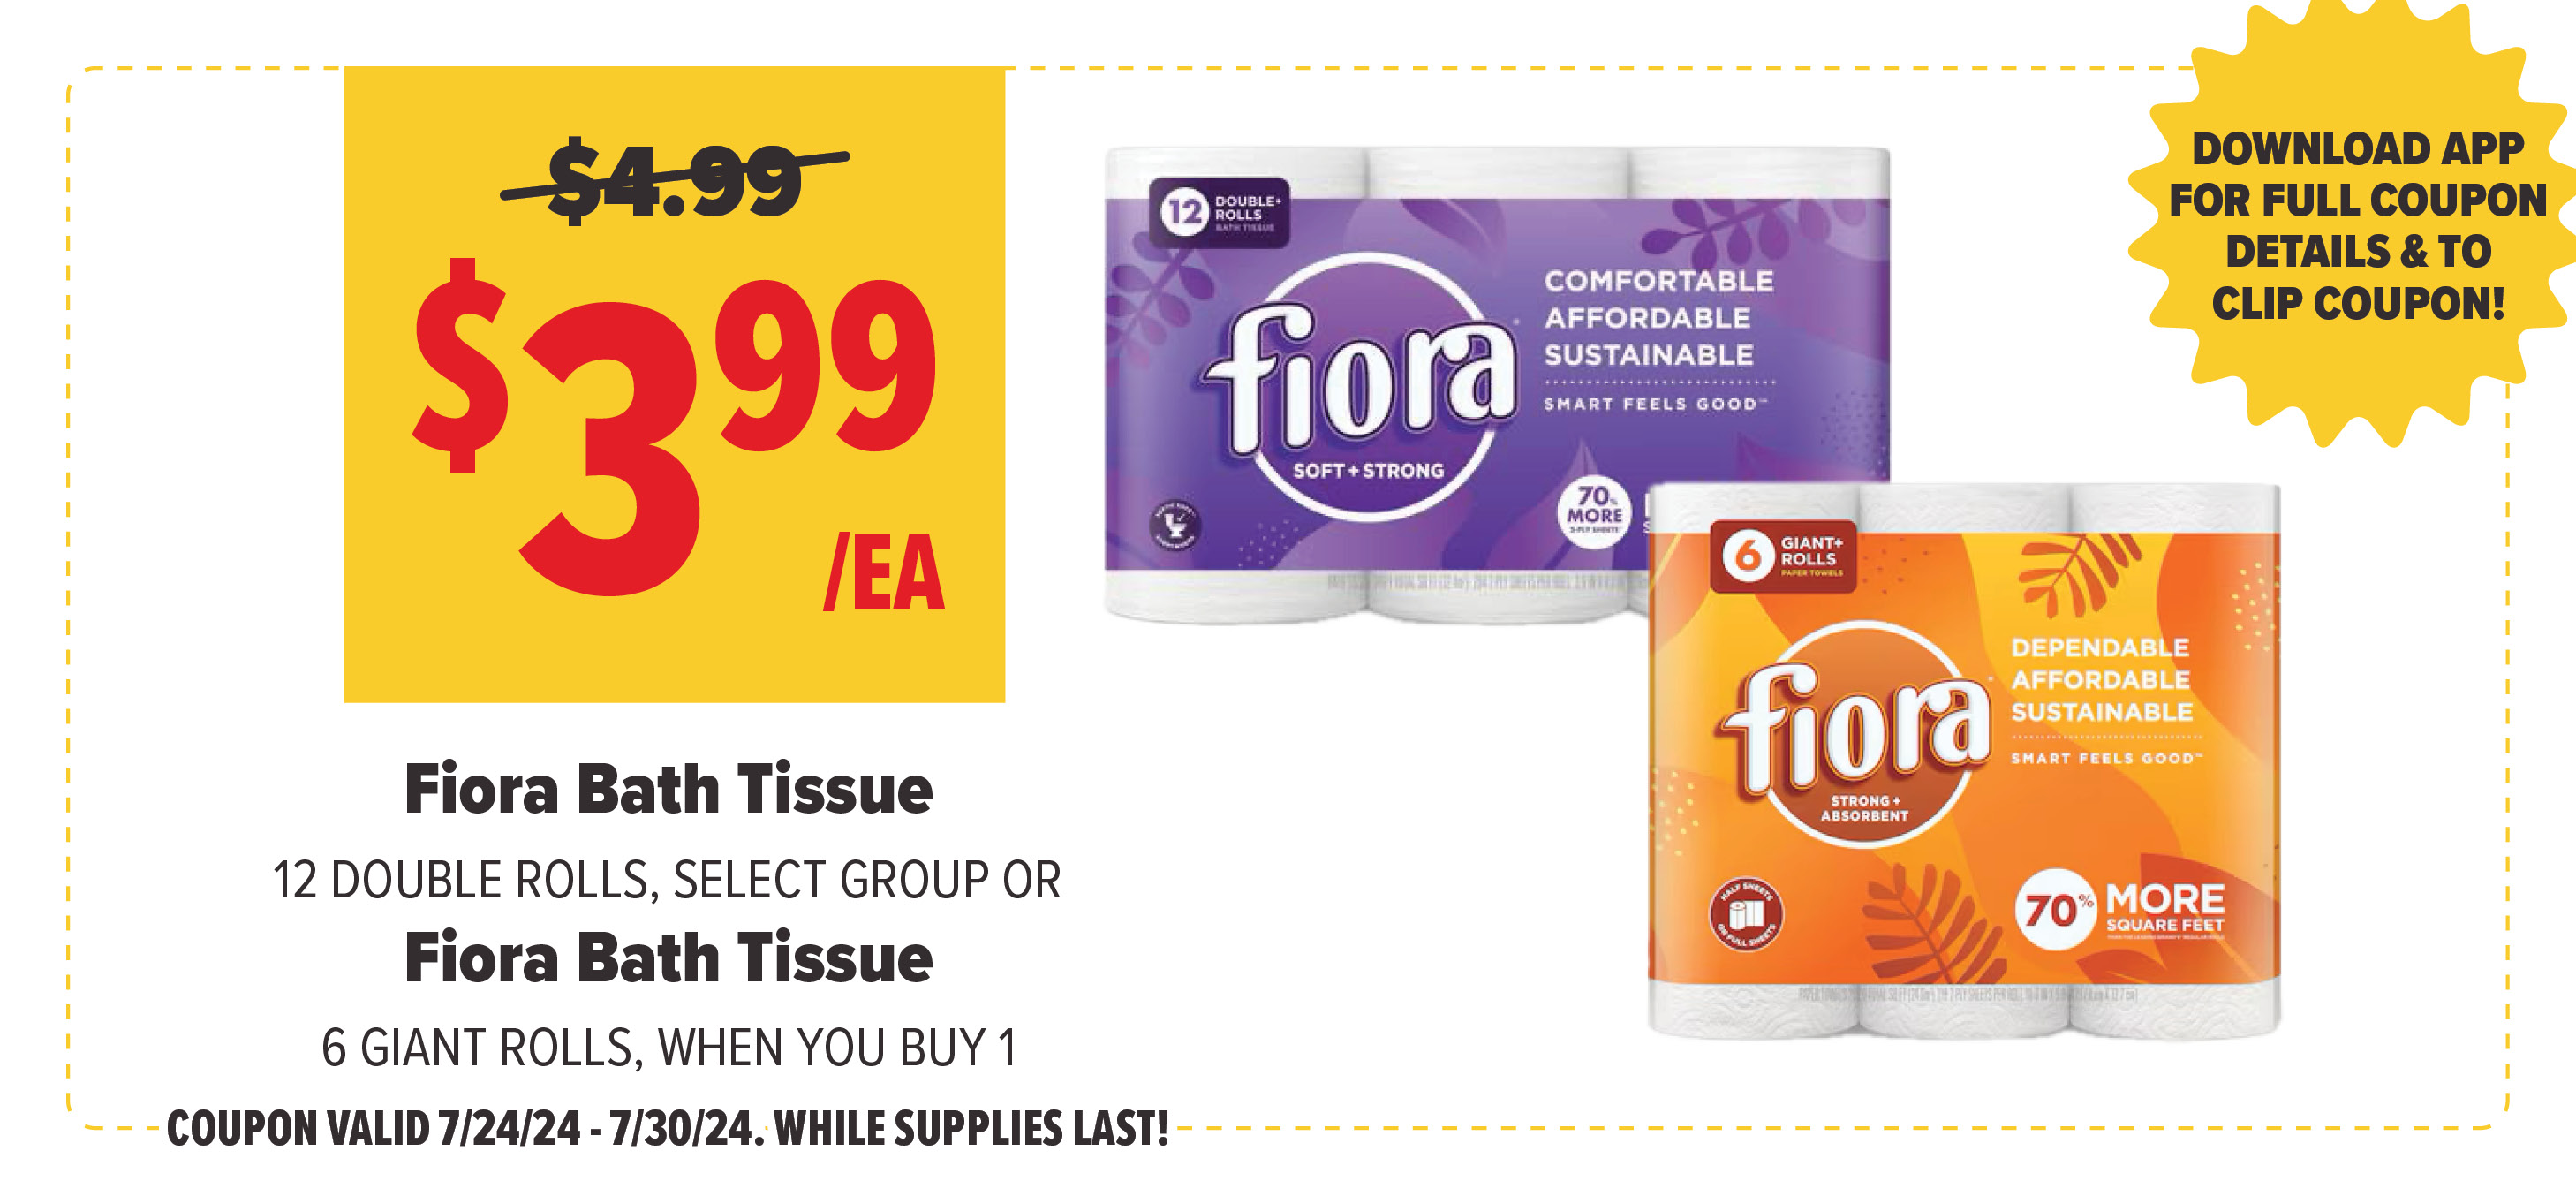 Digital App Deal of the Week, $3.99 Each: Fiora Bath Tissue 12 DOUBLE ROLLS, SELECT GROUP OR Fiora Bath Tissue 6 GIANT ROLLS, WHEN YOU BUY 1, COUPON VALID 7/24/24 thru 7/30/24. WHILE SUPPLIES LAST!